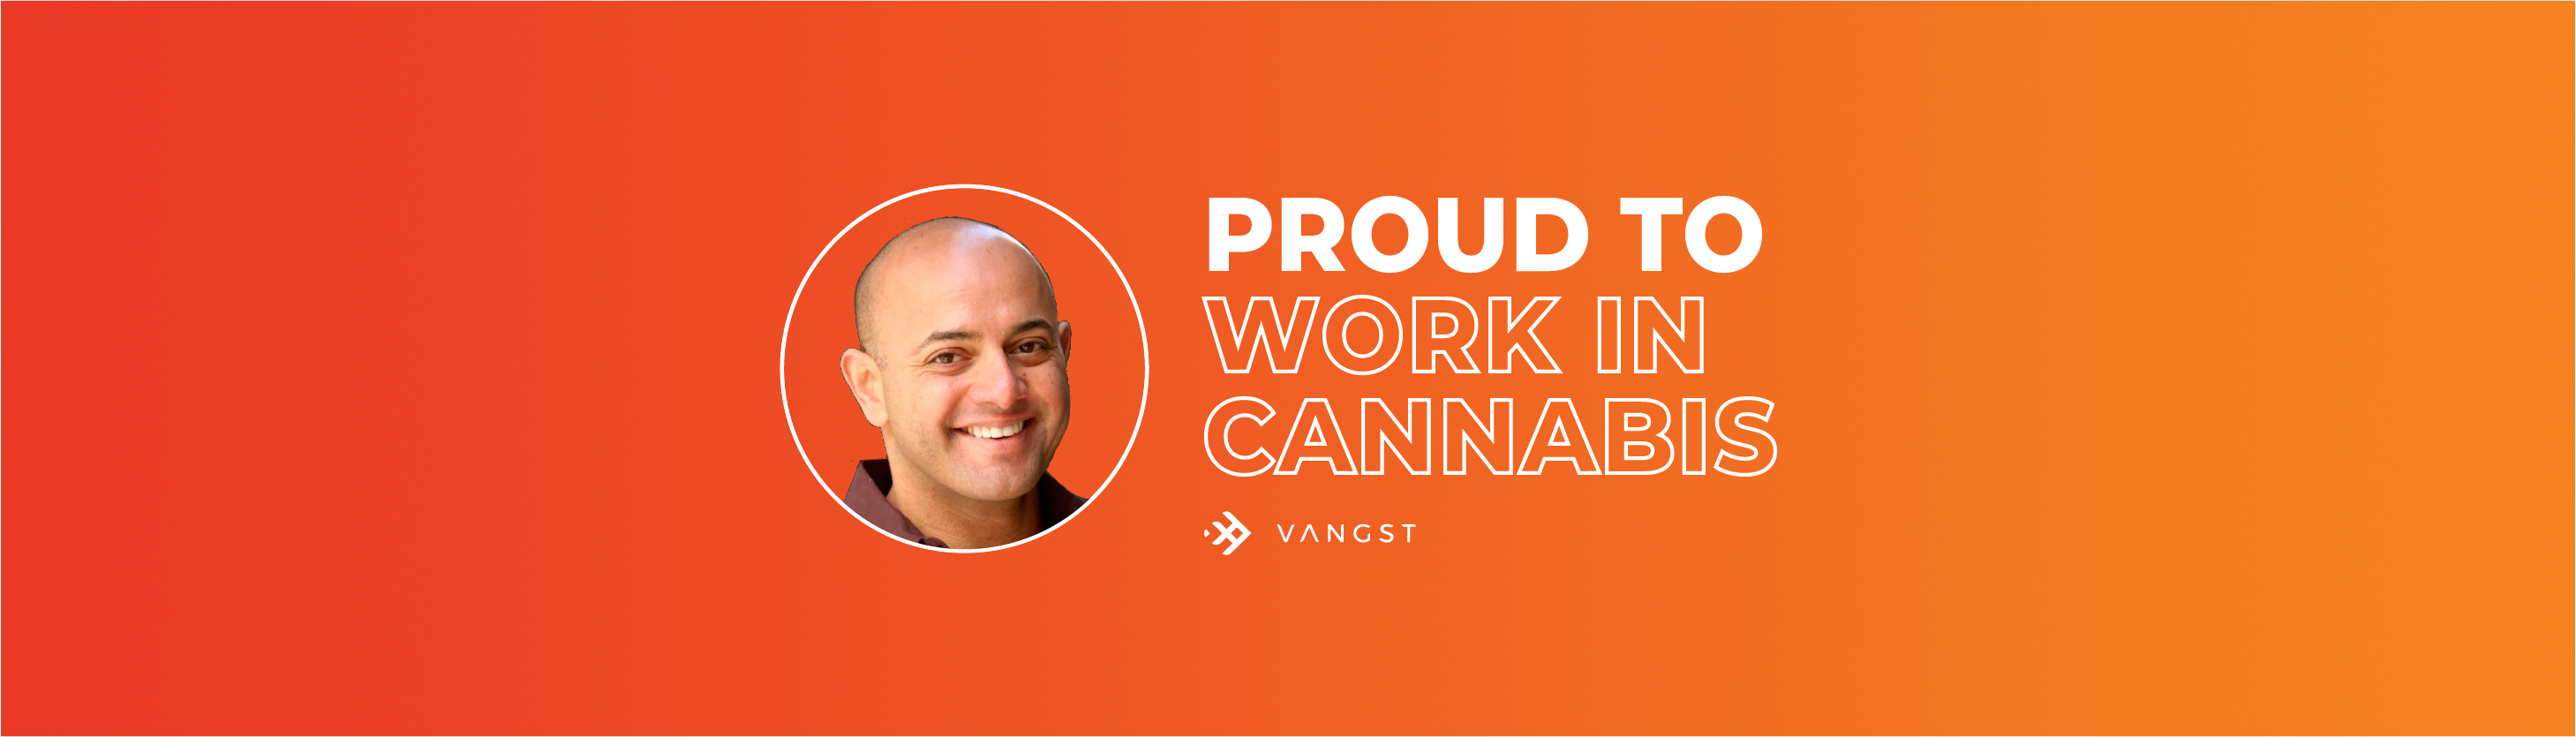 From the 'Oh Fs' to Success: Building a Leading Cannabis Brand with Peter Barsoom